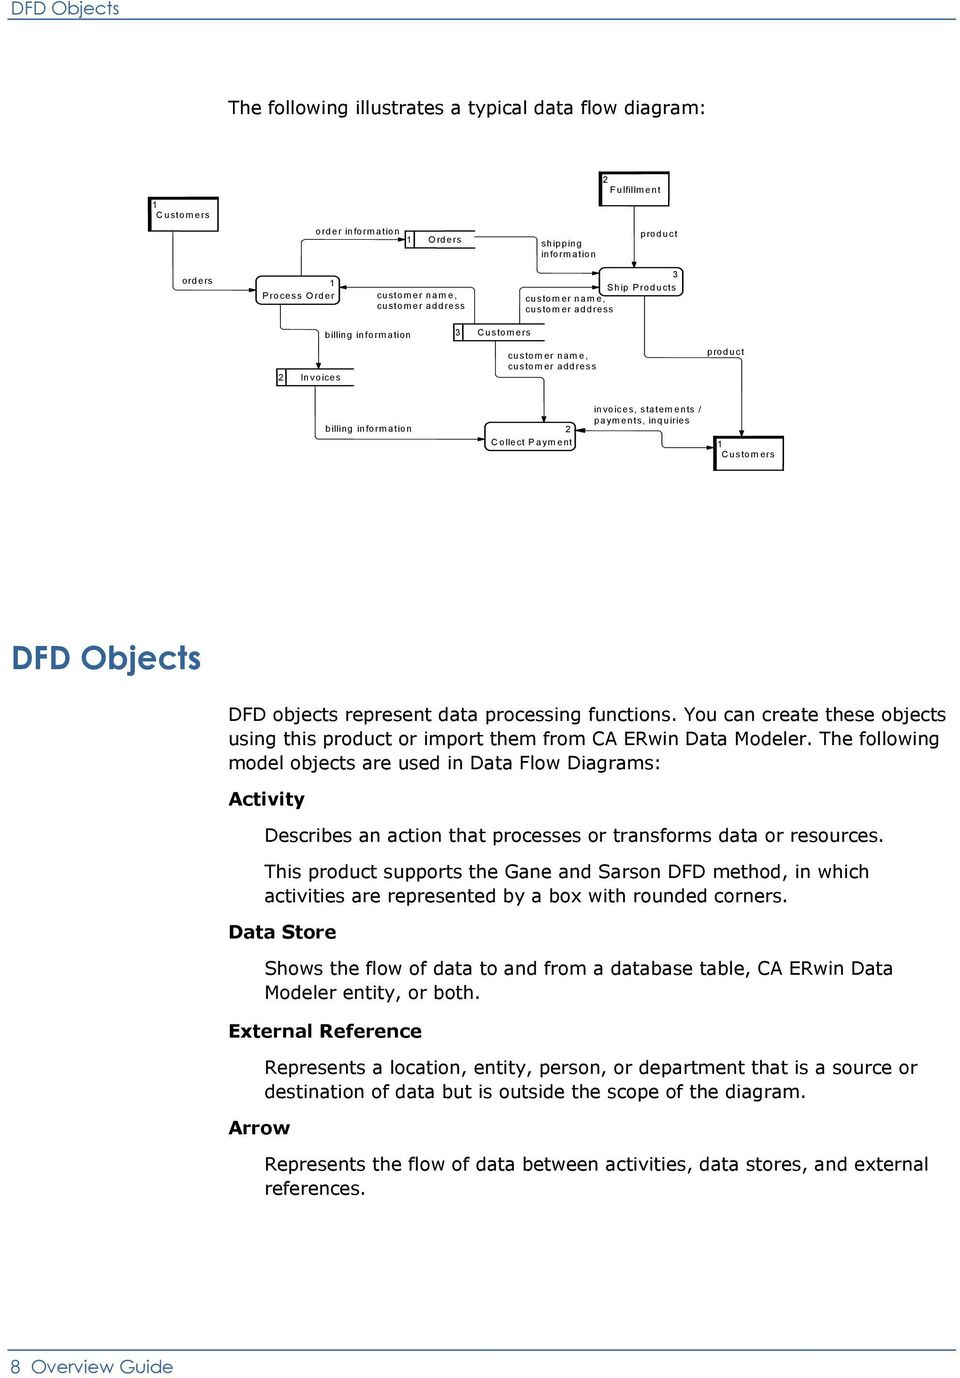 / payments, inquiries 1 Customers DFD Objects DFD objects represent data processing functions. You can create these objects using this product or import them from CA ERwin Data Modeler.